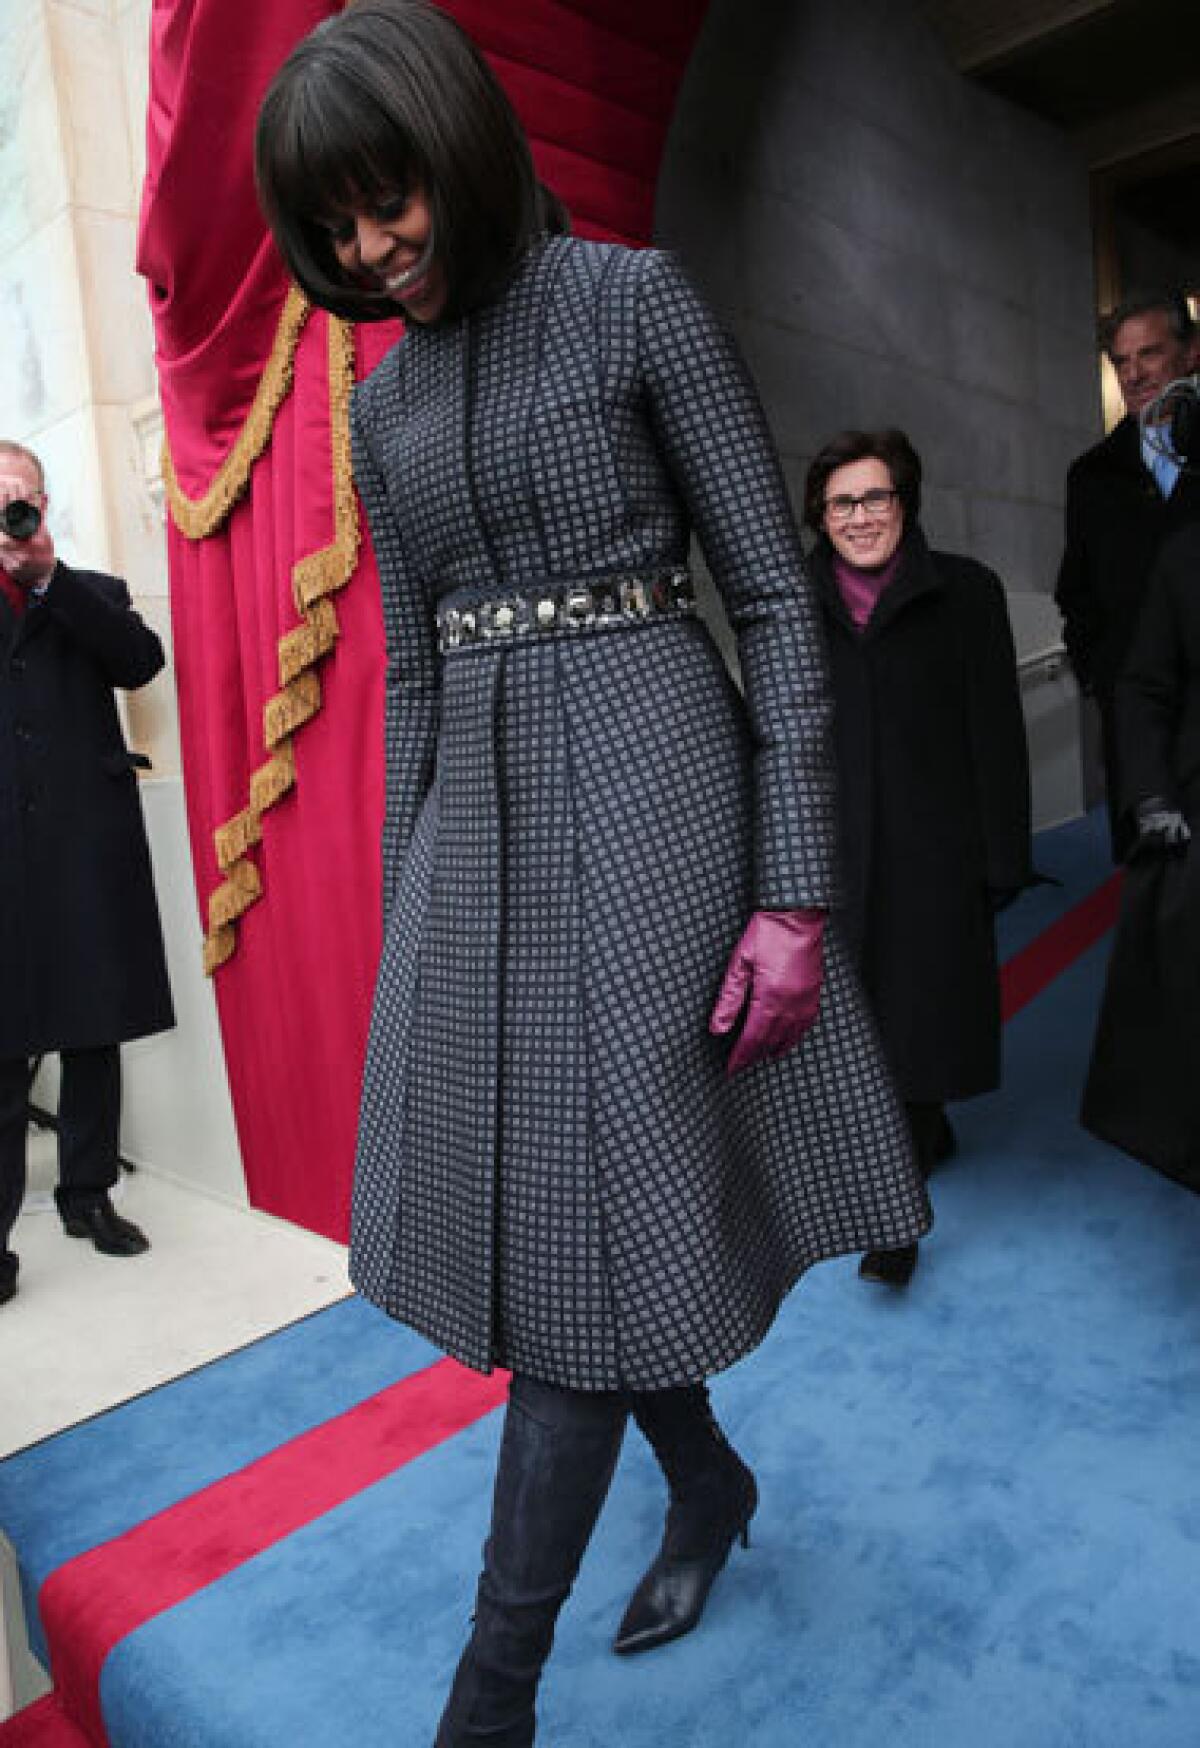 First Lady Michelle Obama arrives during the presidential inauguration wearing a Thom Browne coat.